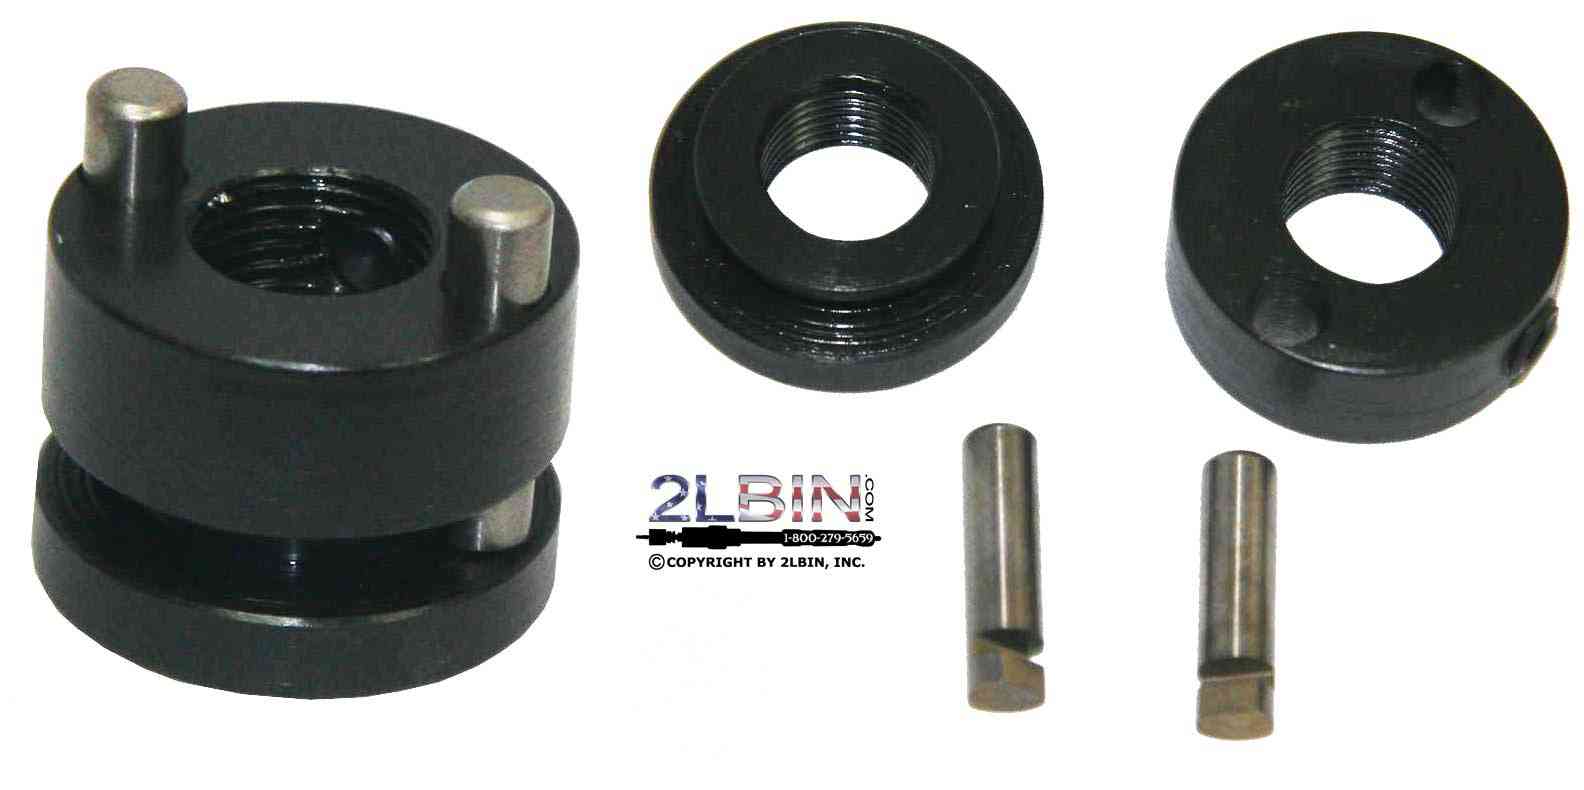 Mandrels for tapping machine